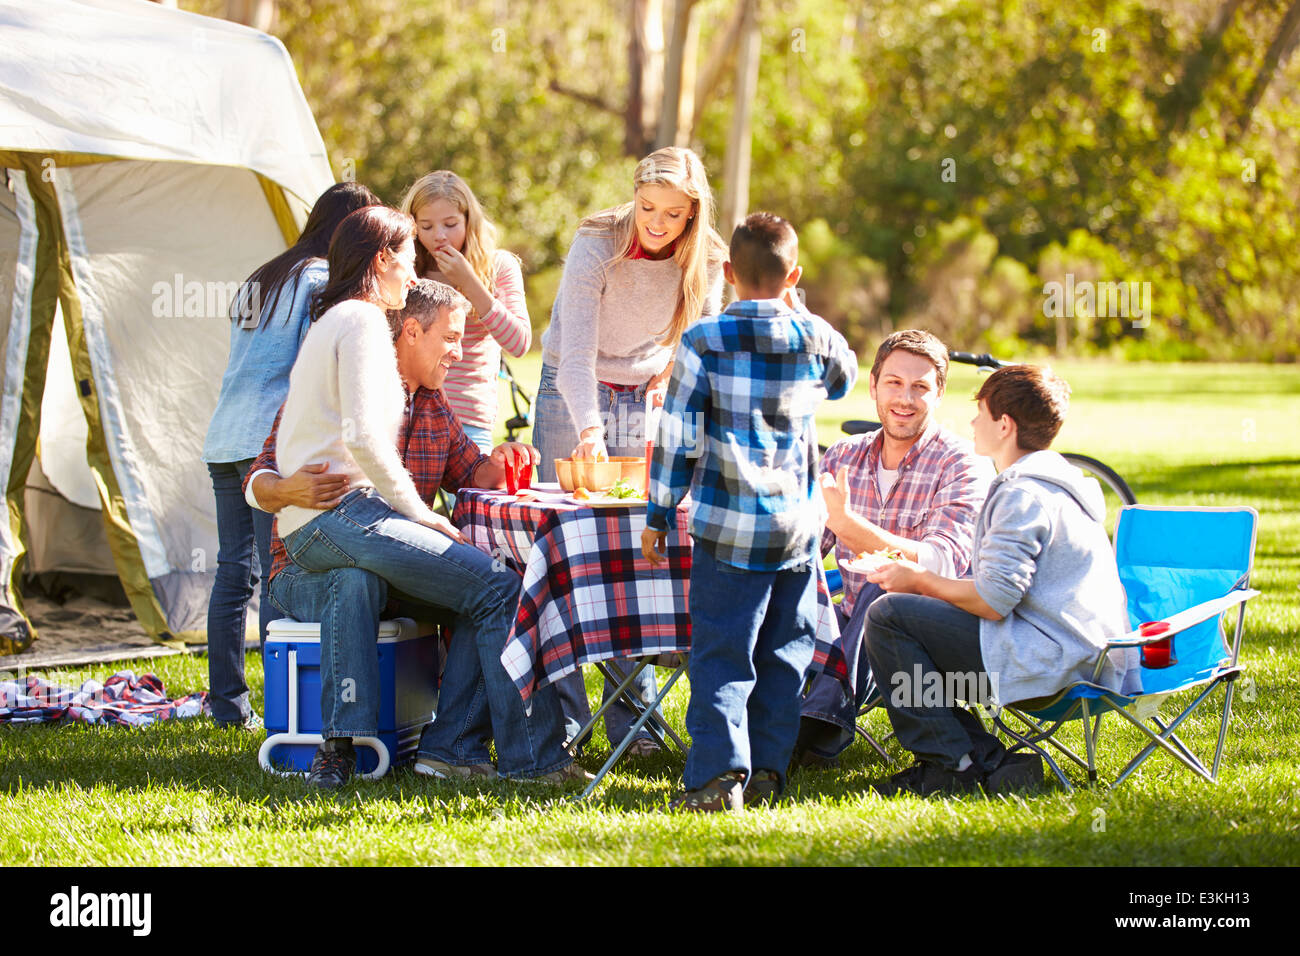 Two Families Enjoying Camping Holiday In Countryside Stock Photo